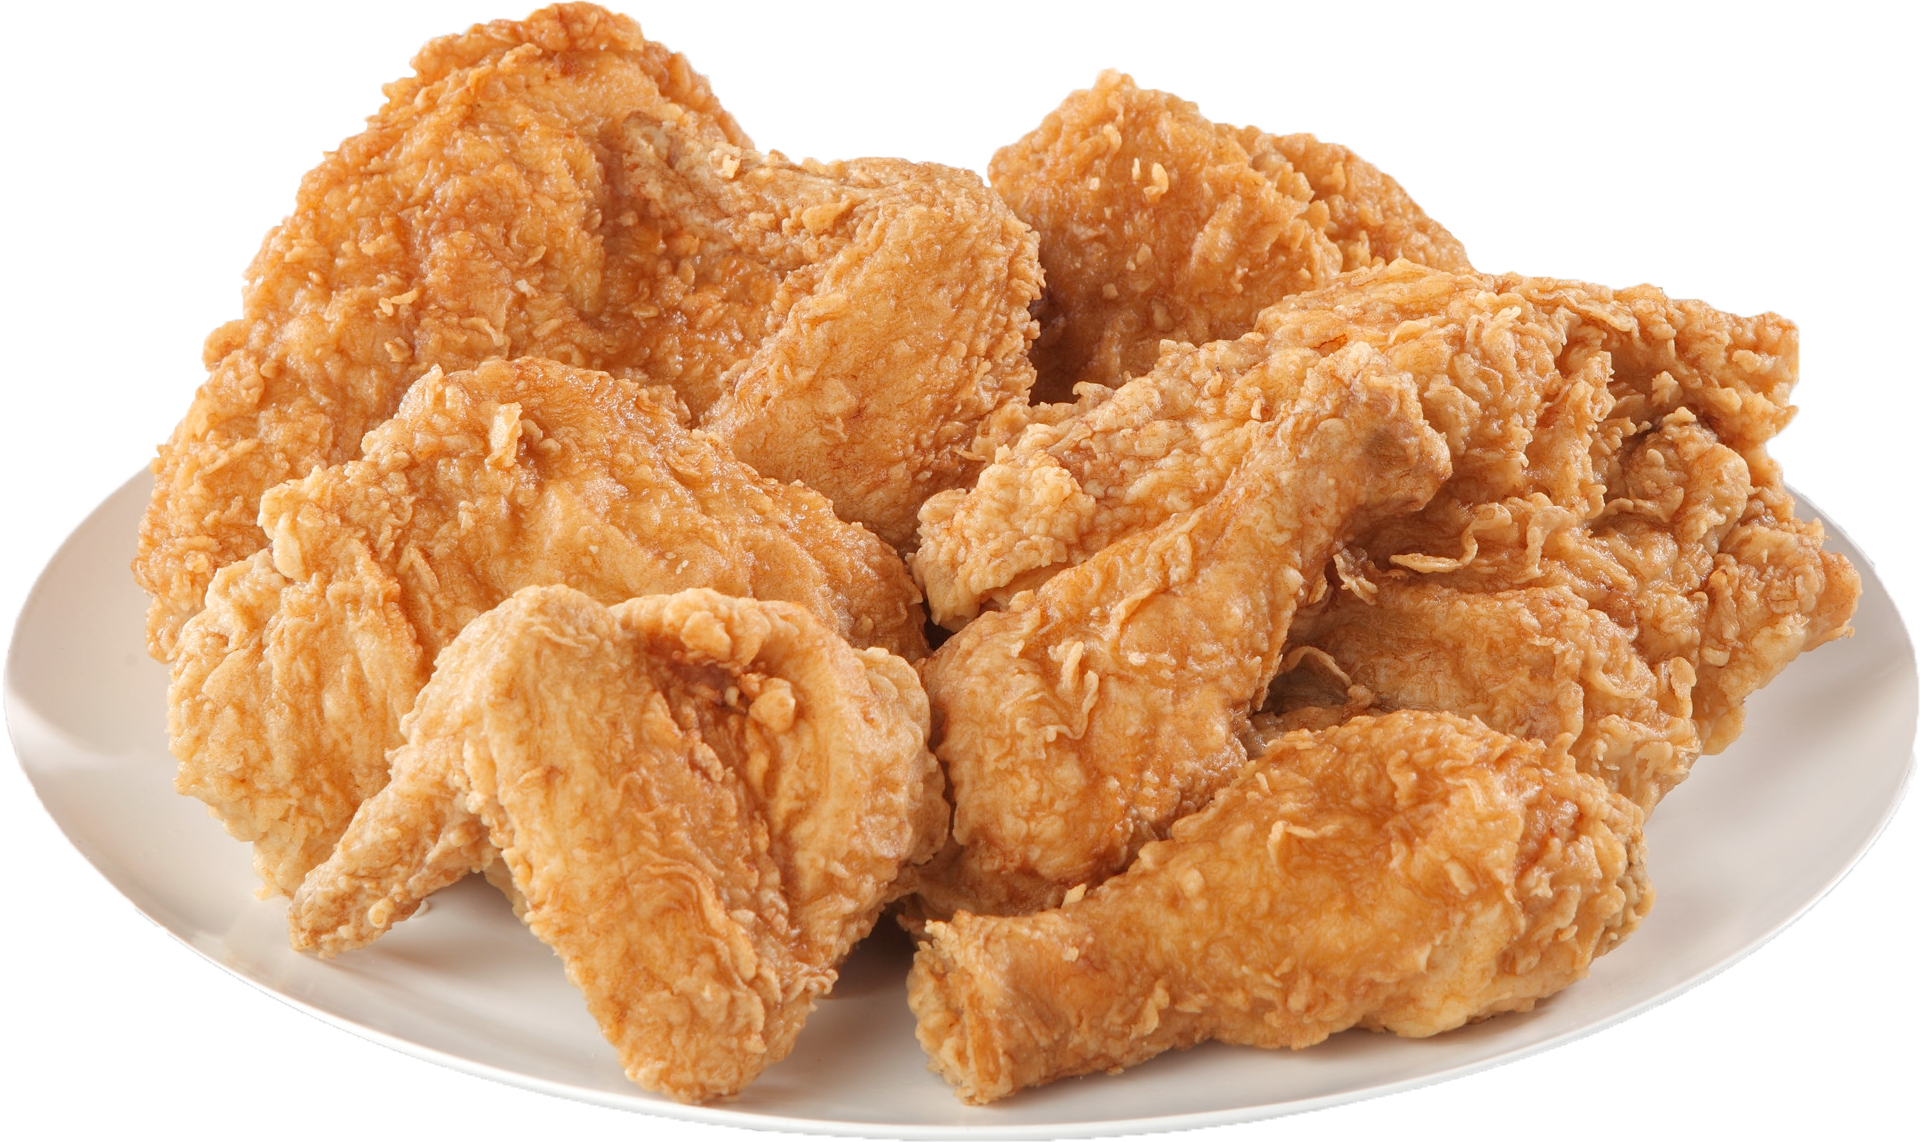 Chicken Crunchy Pic Kfc PNG Image High Quality PNG Image